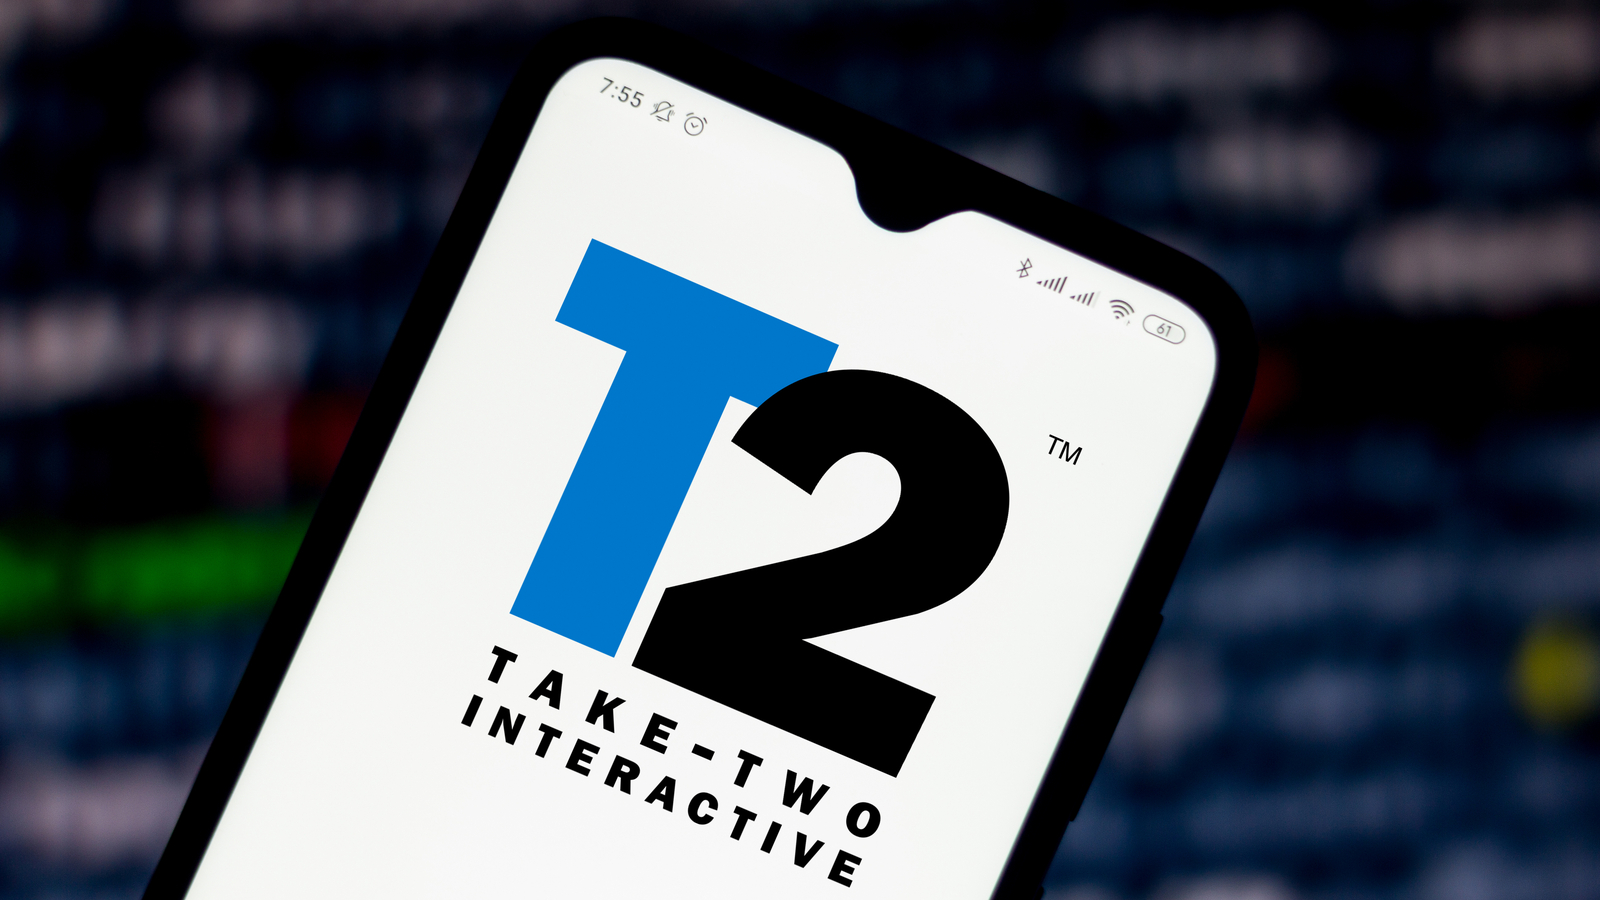 Take-Two Interactive (TTWO Stock) logo displayed on a smartphone